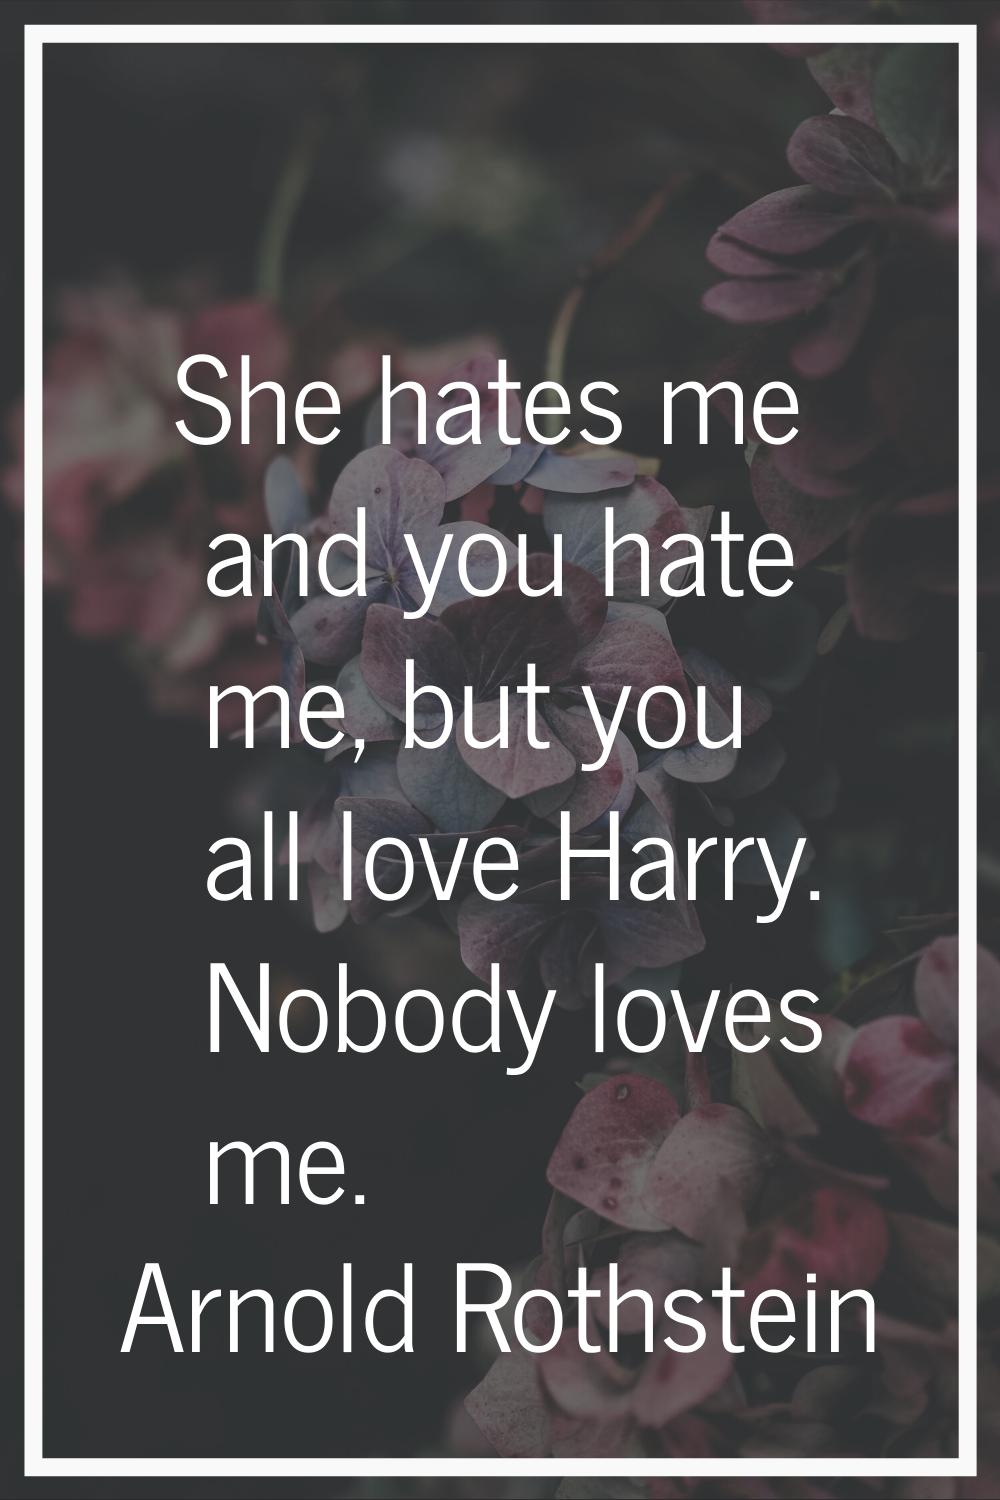 She hates me and you hate me, but you all love Harry. Nobody loves me.